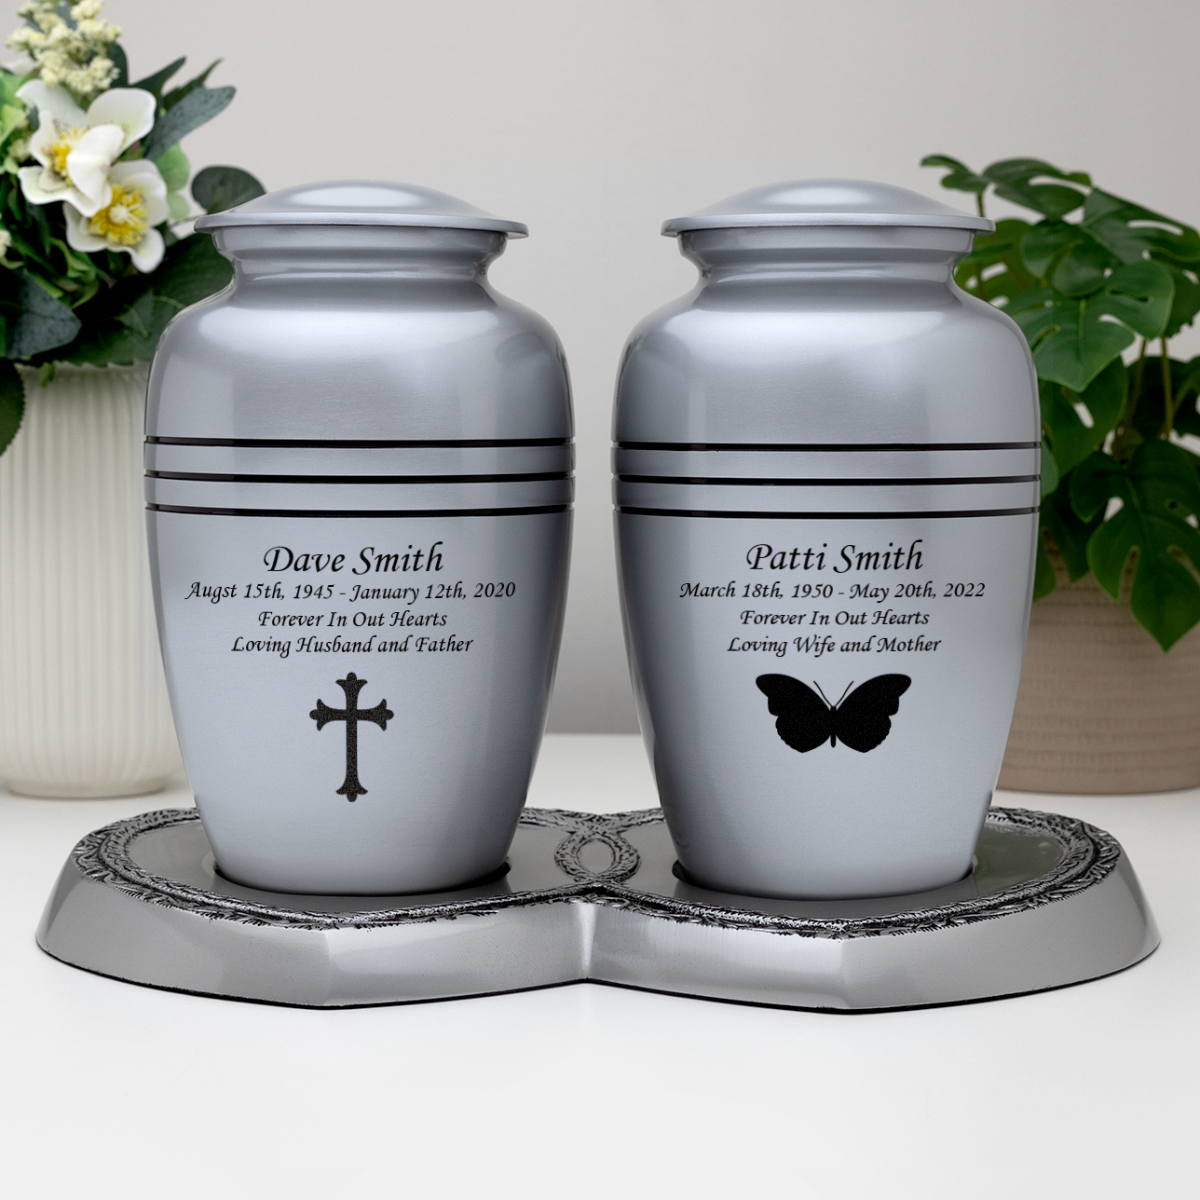 Pewter companion urns with metal base.